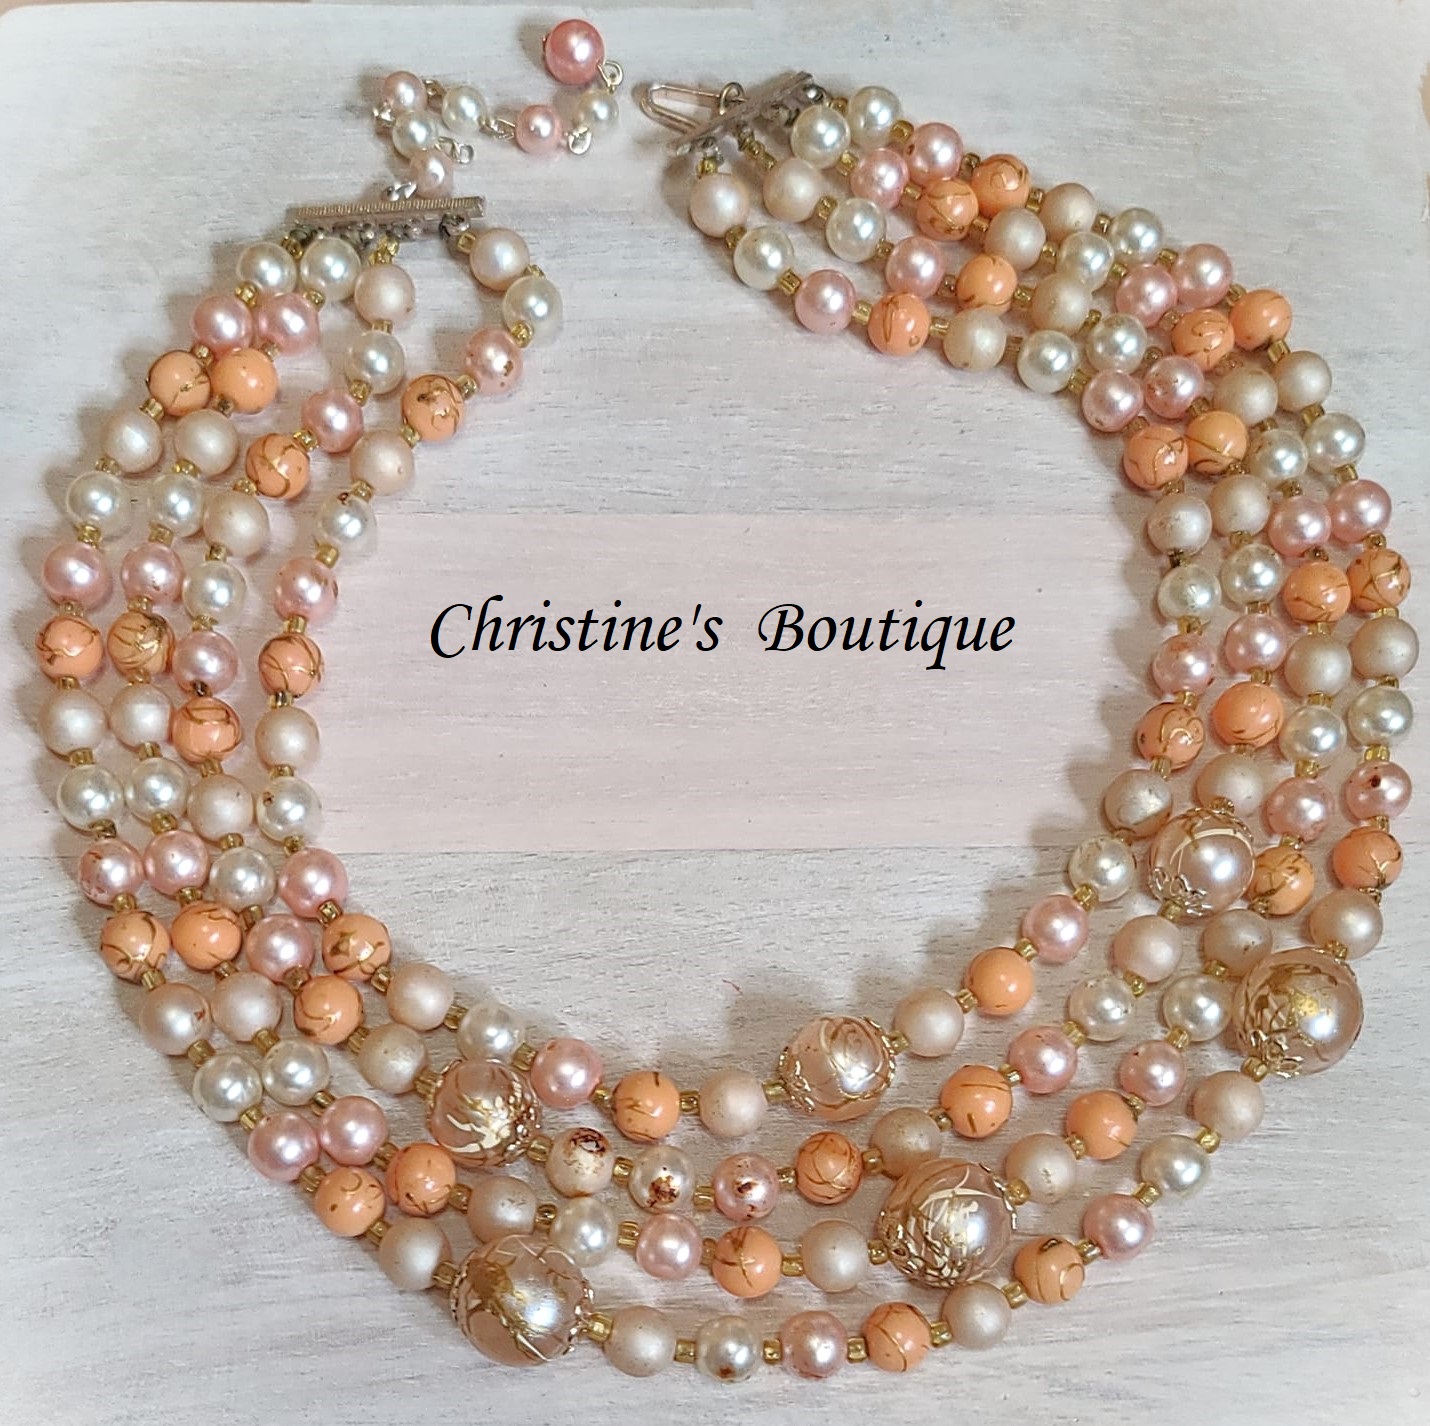 4 Row vintage beaded necklace with pinks,peach and orange hues